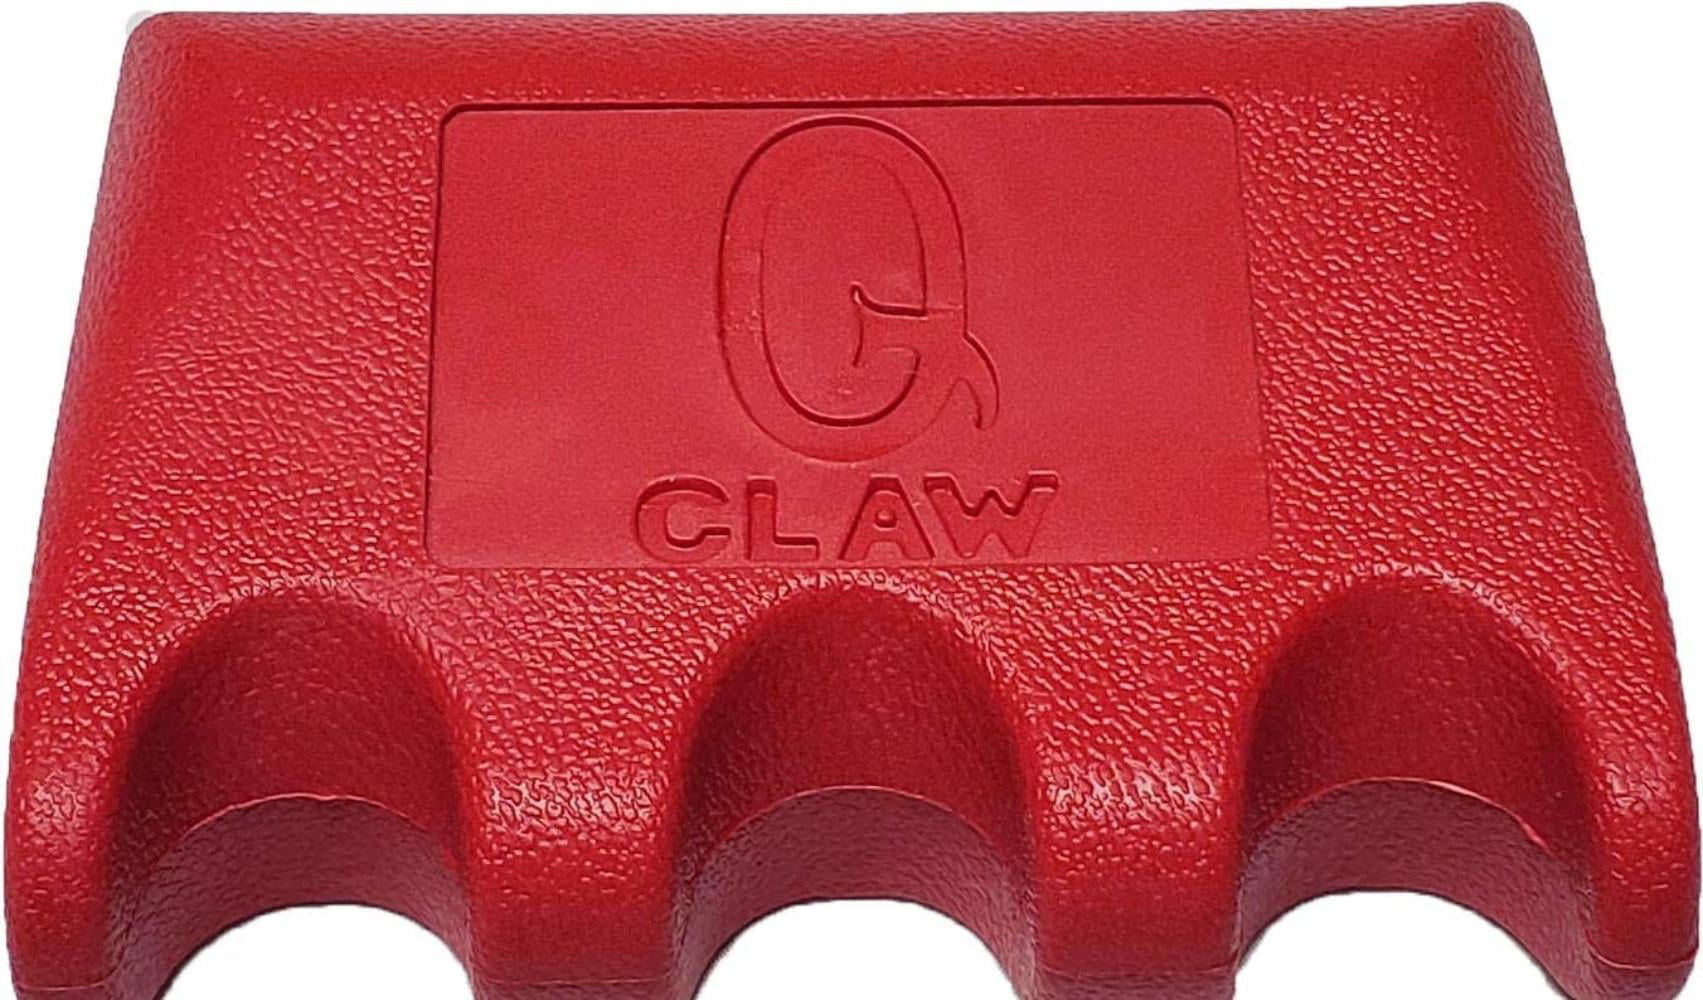 Q-Claw QCLAW Portable Pool/Billiards Cue Holder/Coin Slot Black 3 Place 